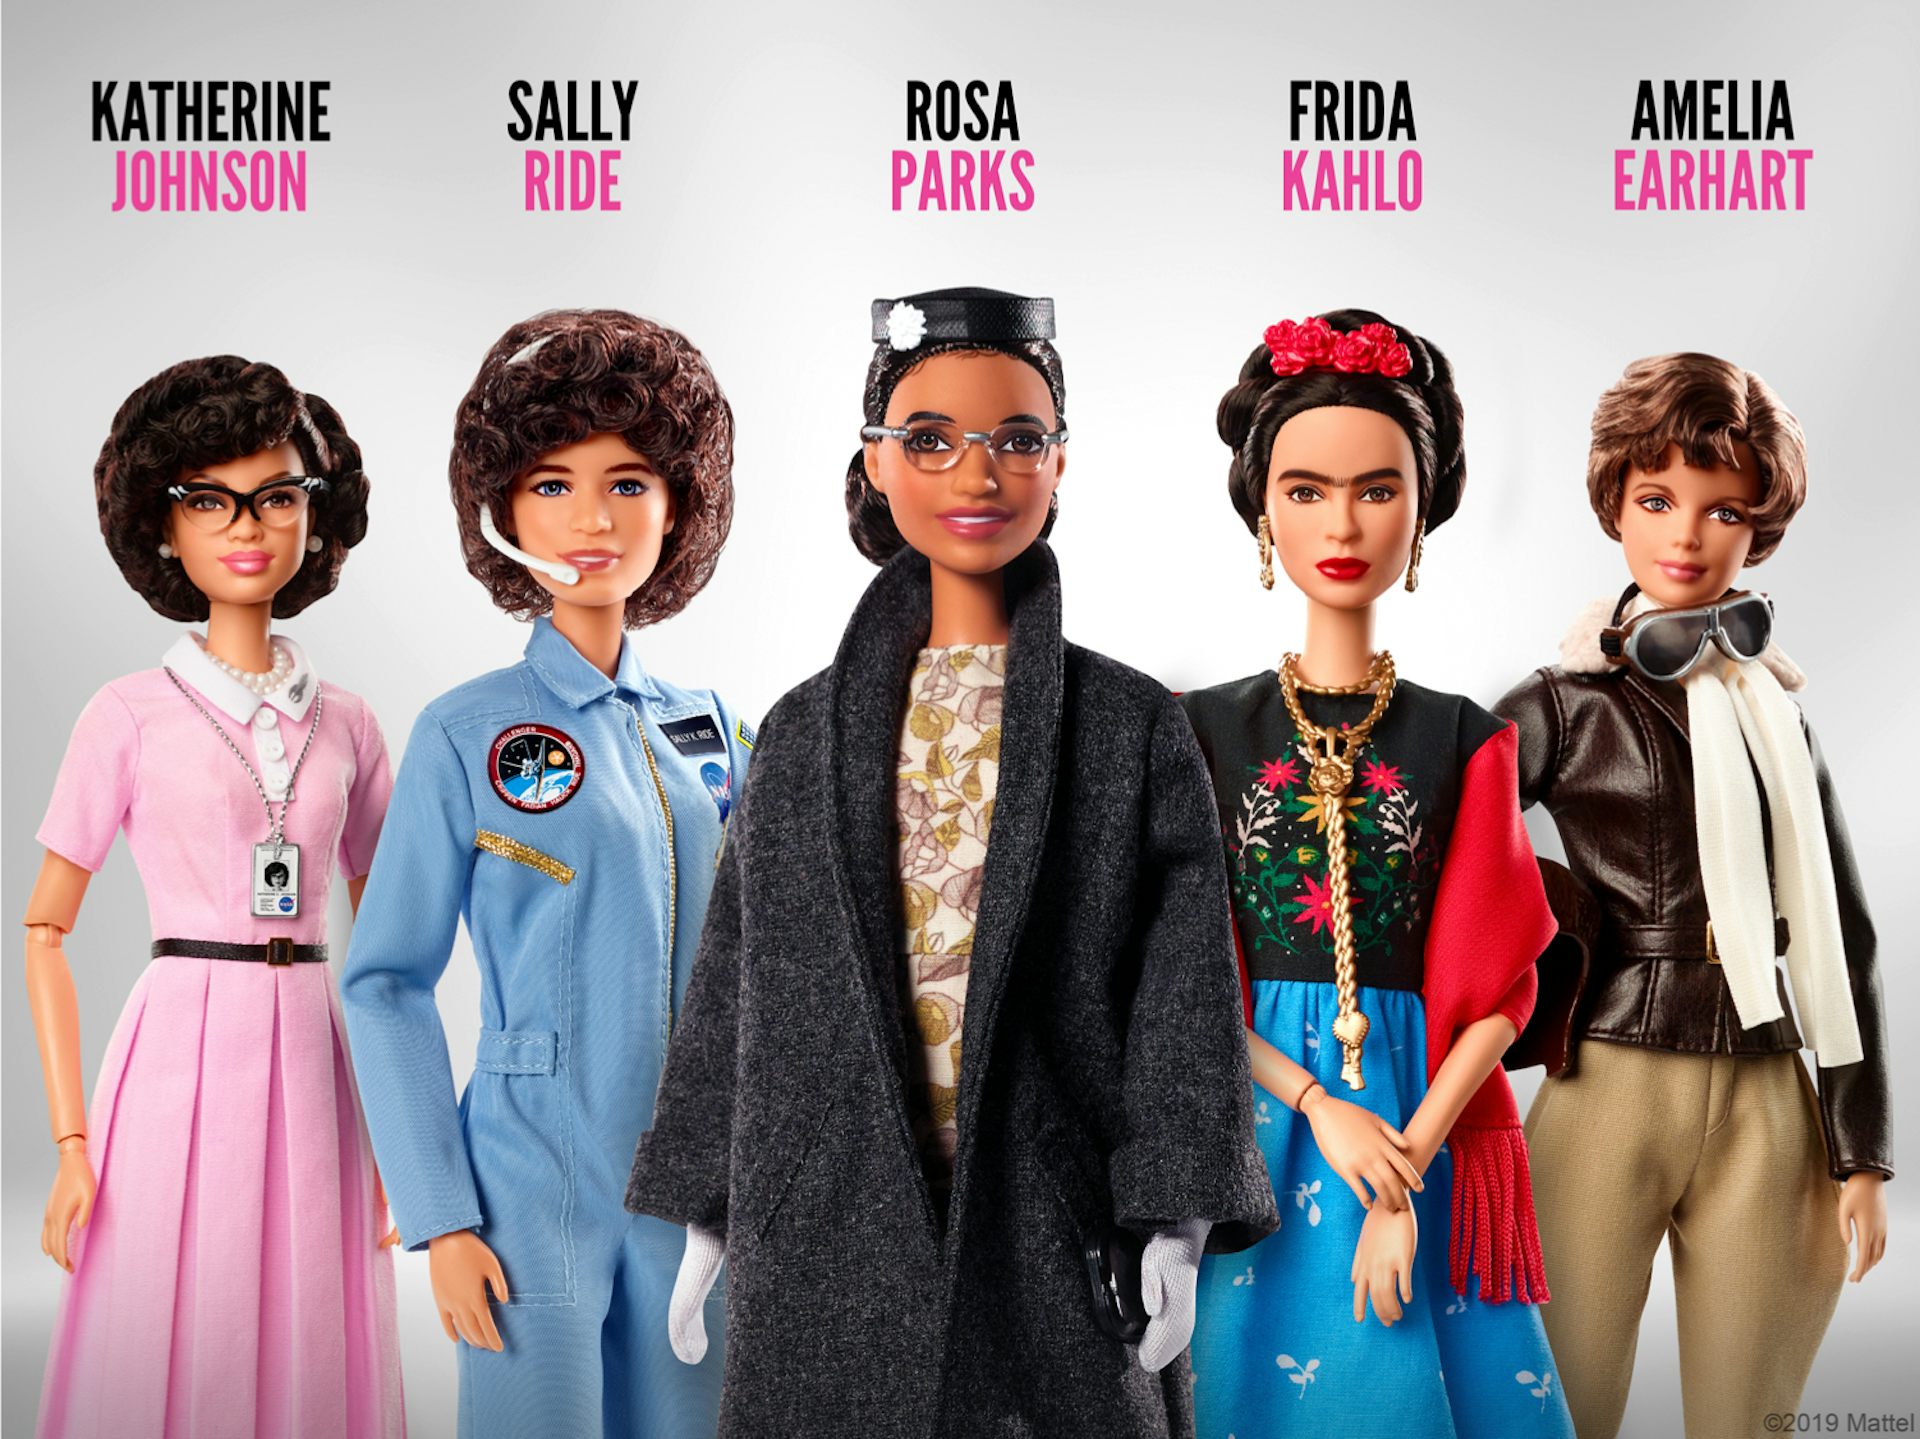 Rosa Parks Barbie doll reflects popular 